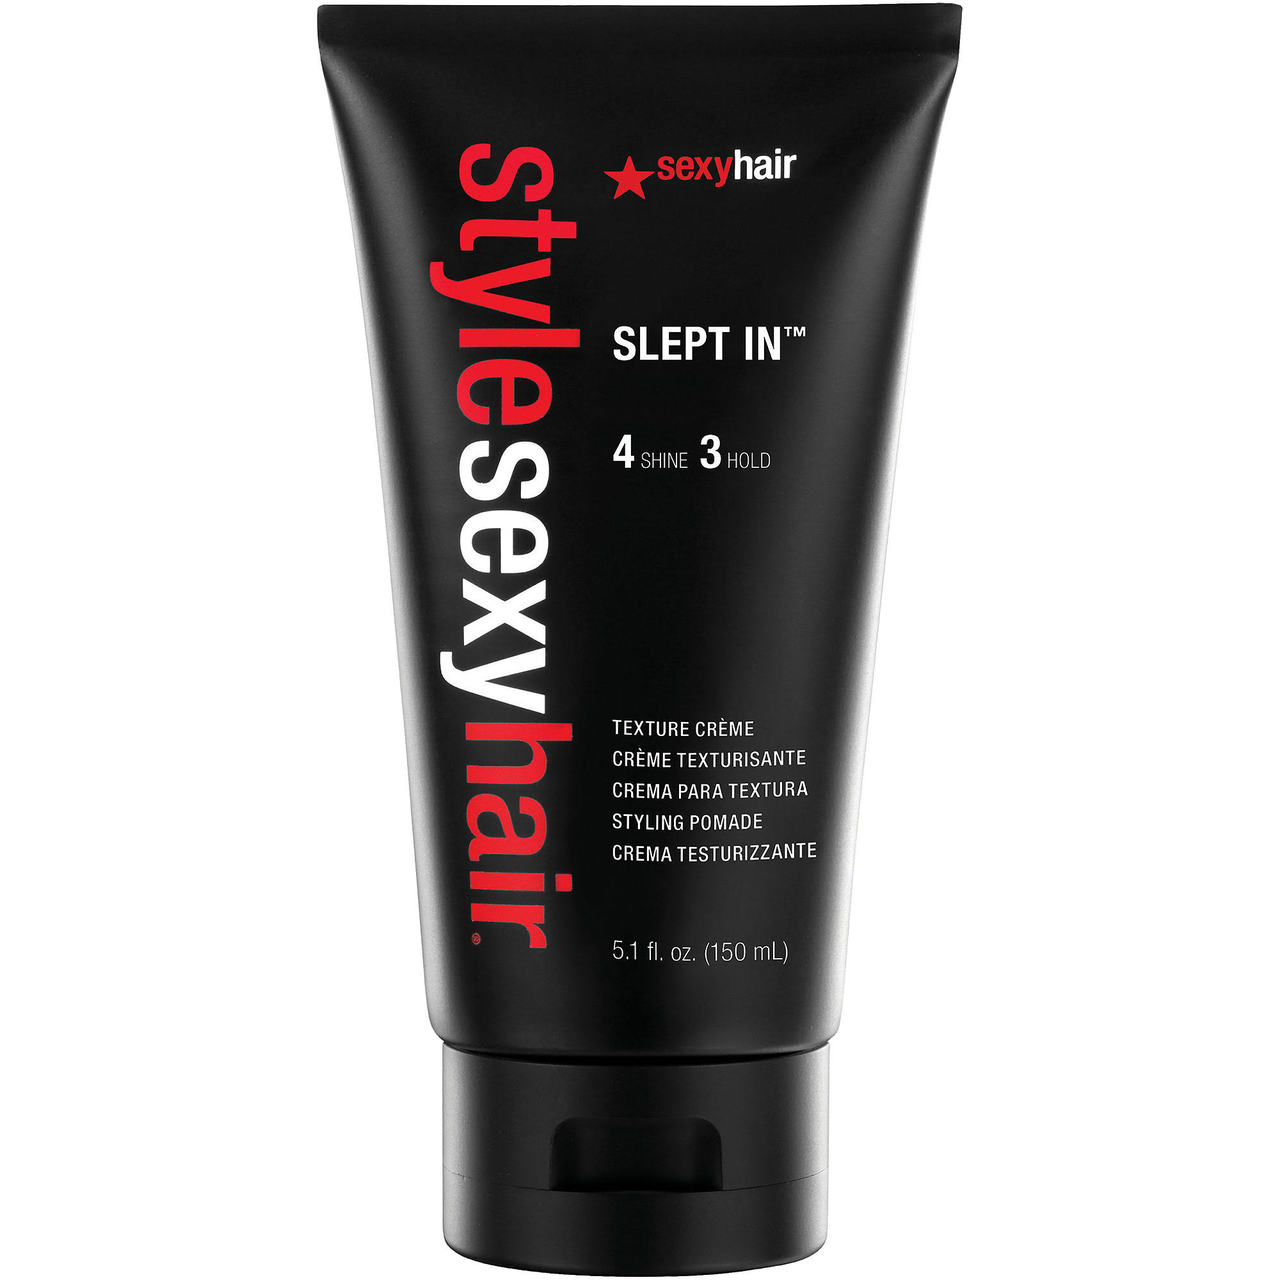 Style Sexy Hair Slept In Texture Creme 5.1 oz. 